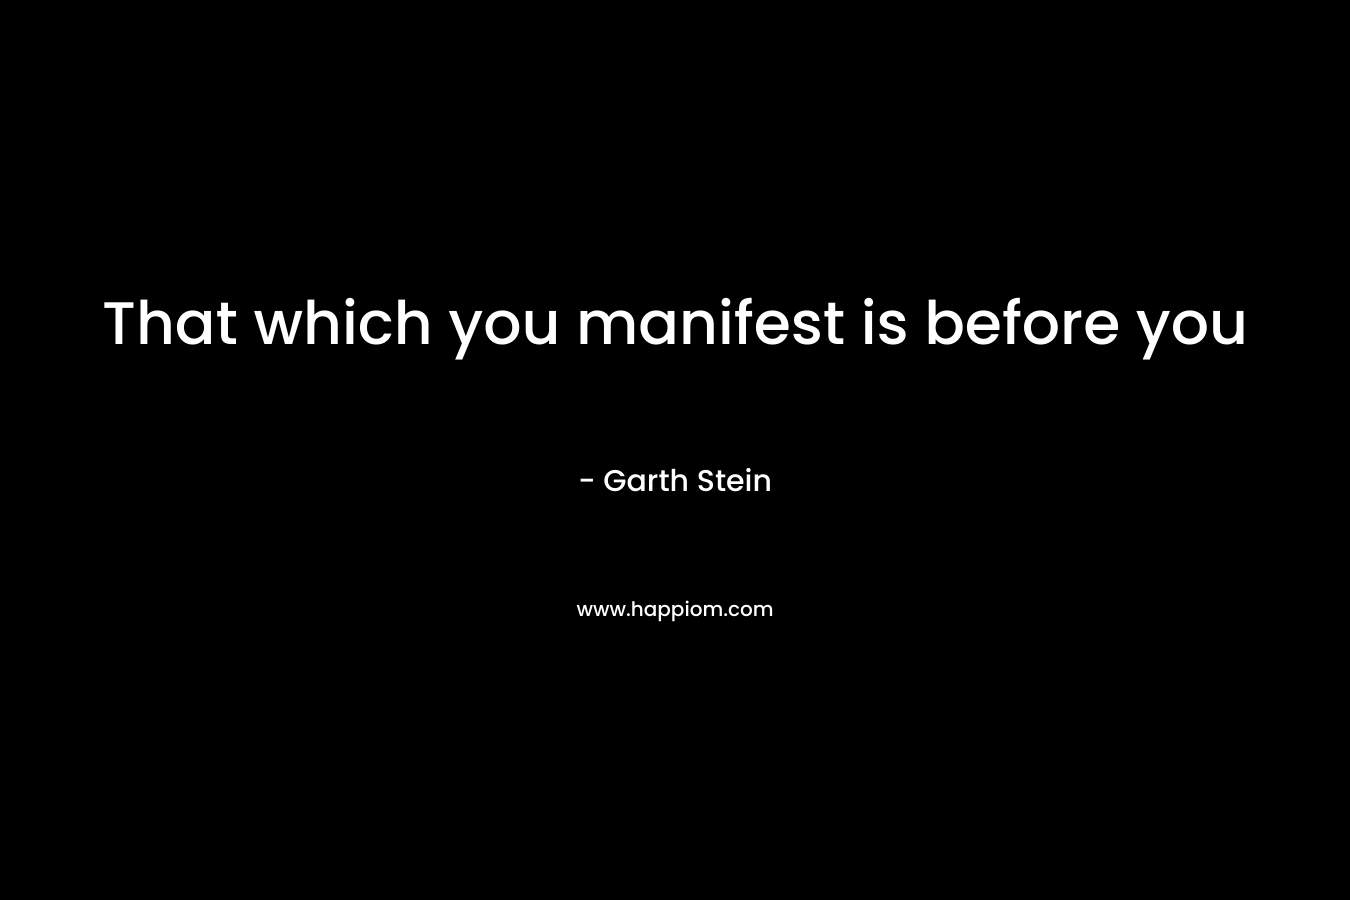 That which you manifest is before you